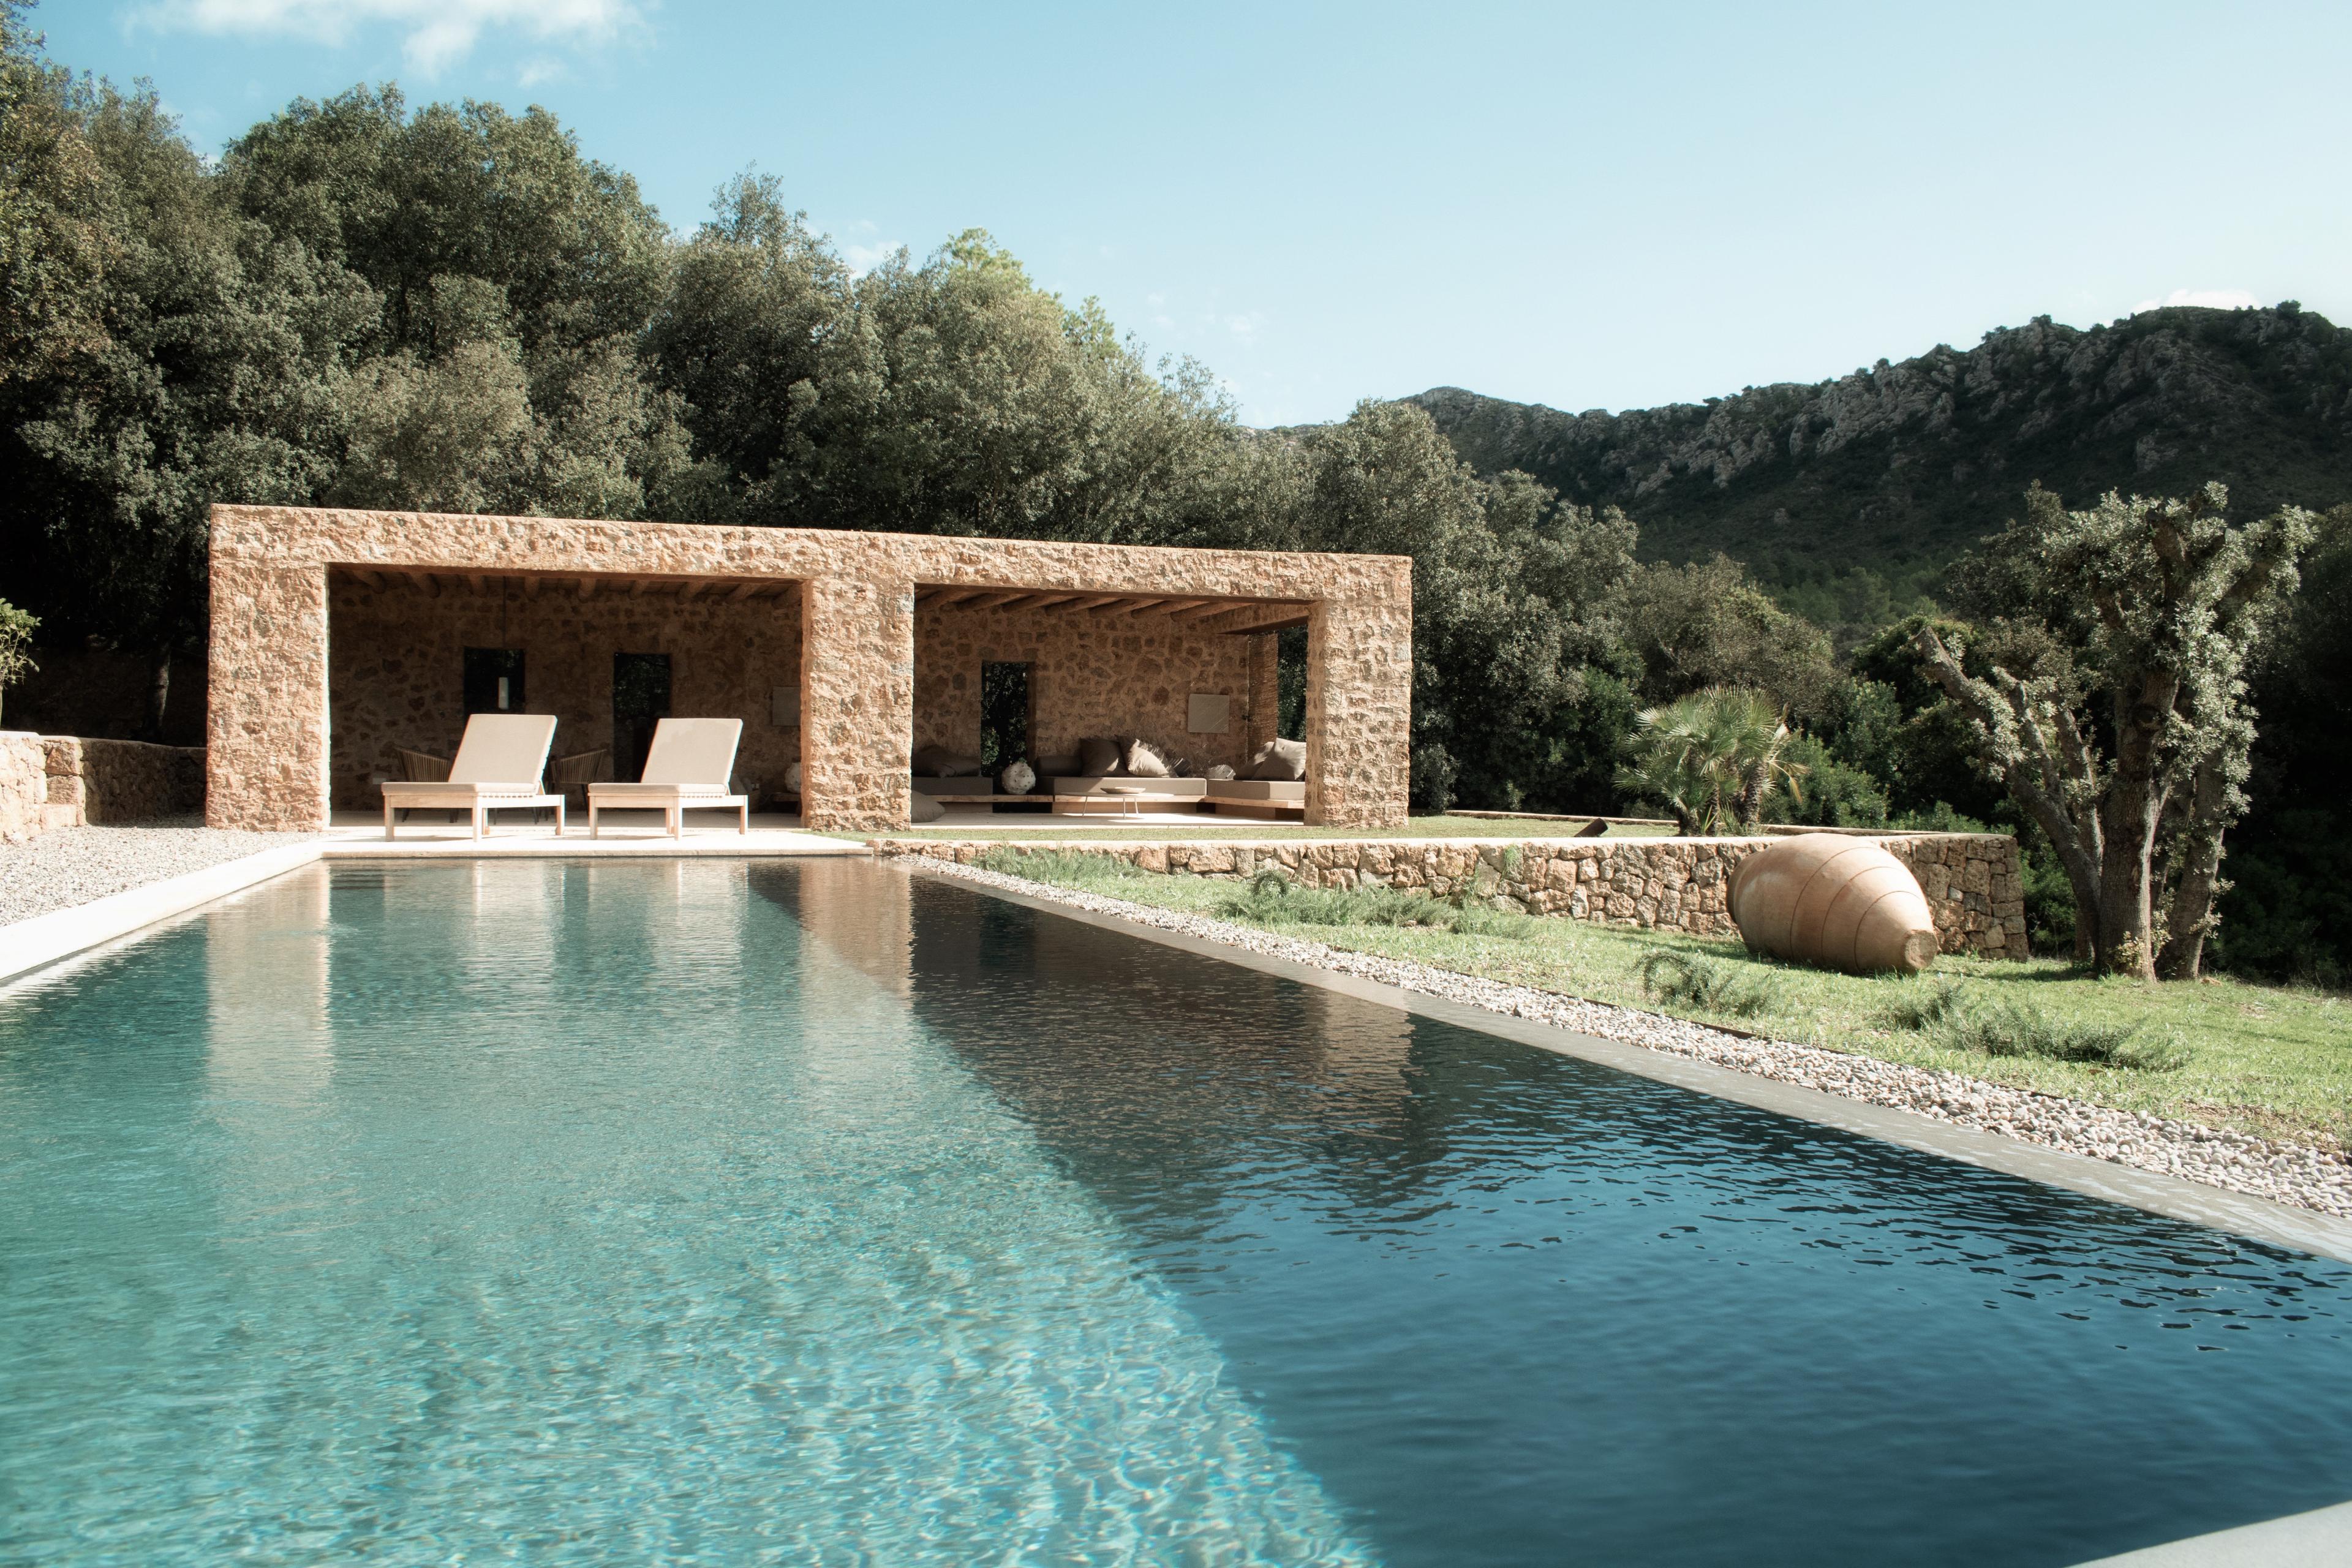 private rectangular pool with a stone cover over the daybeds